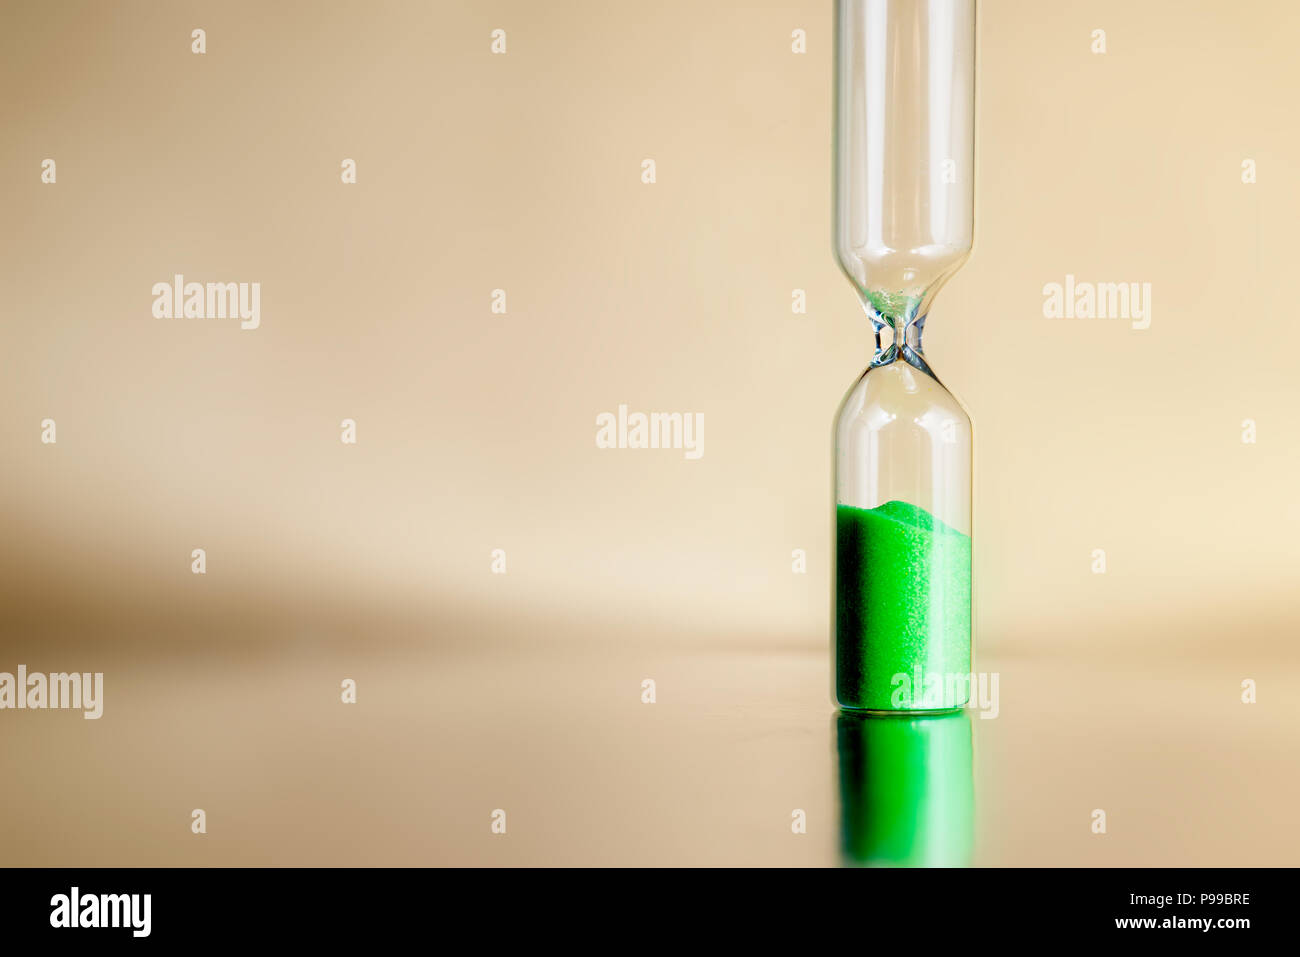 Modern beautiful green hourglass with bright background for copy space. Hourglass time passing concept for business deadline, urgency and running out of time. Stock Photo